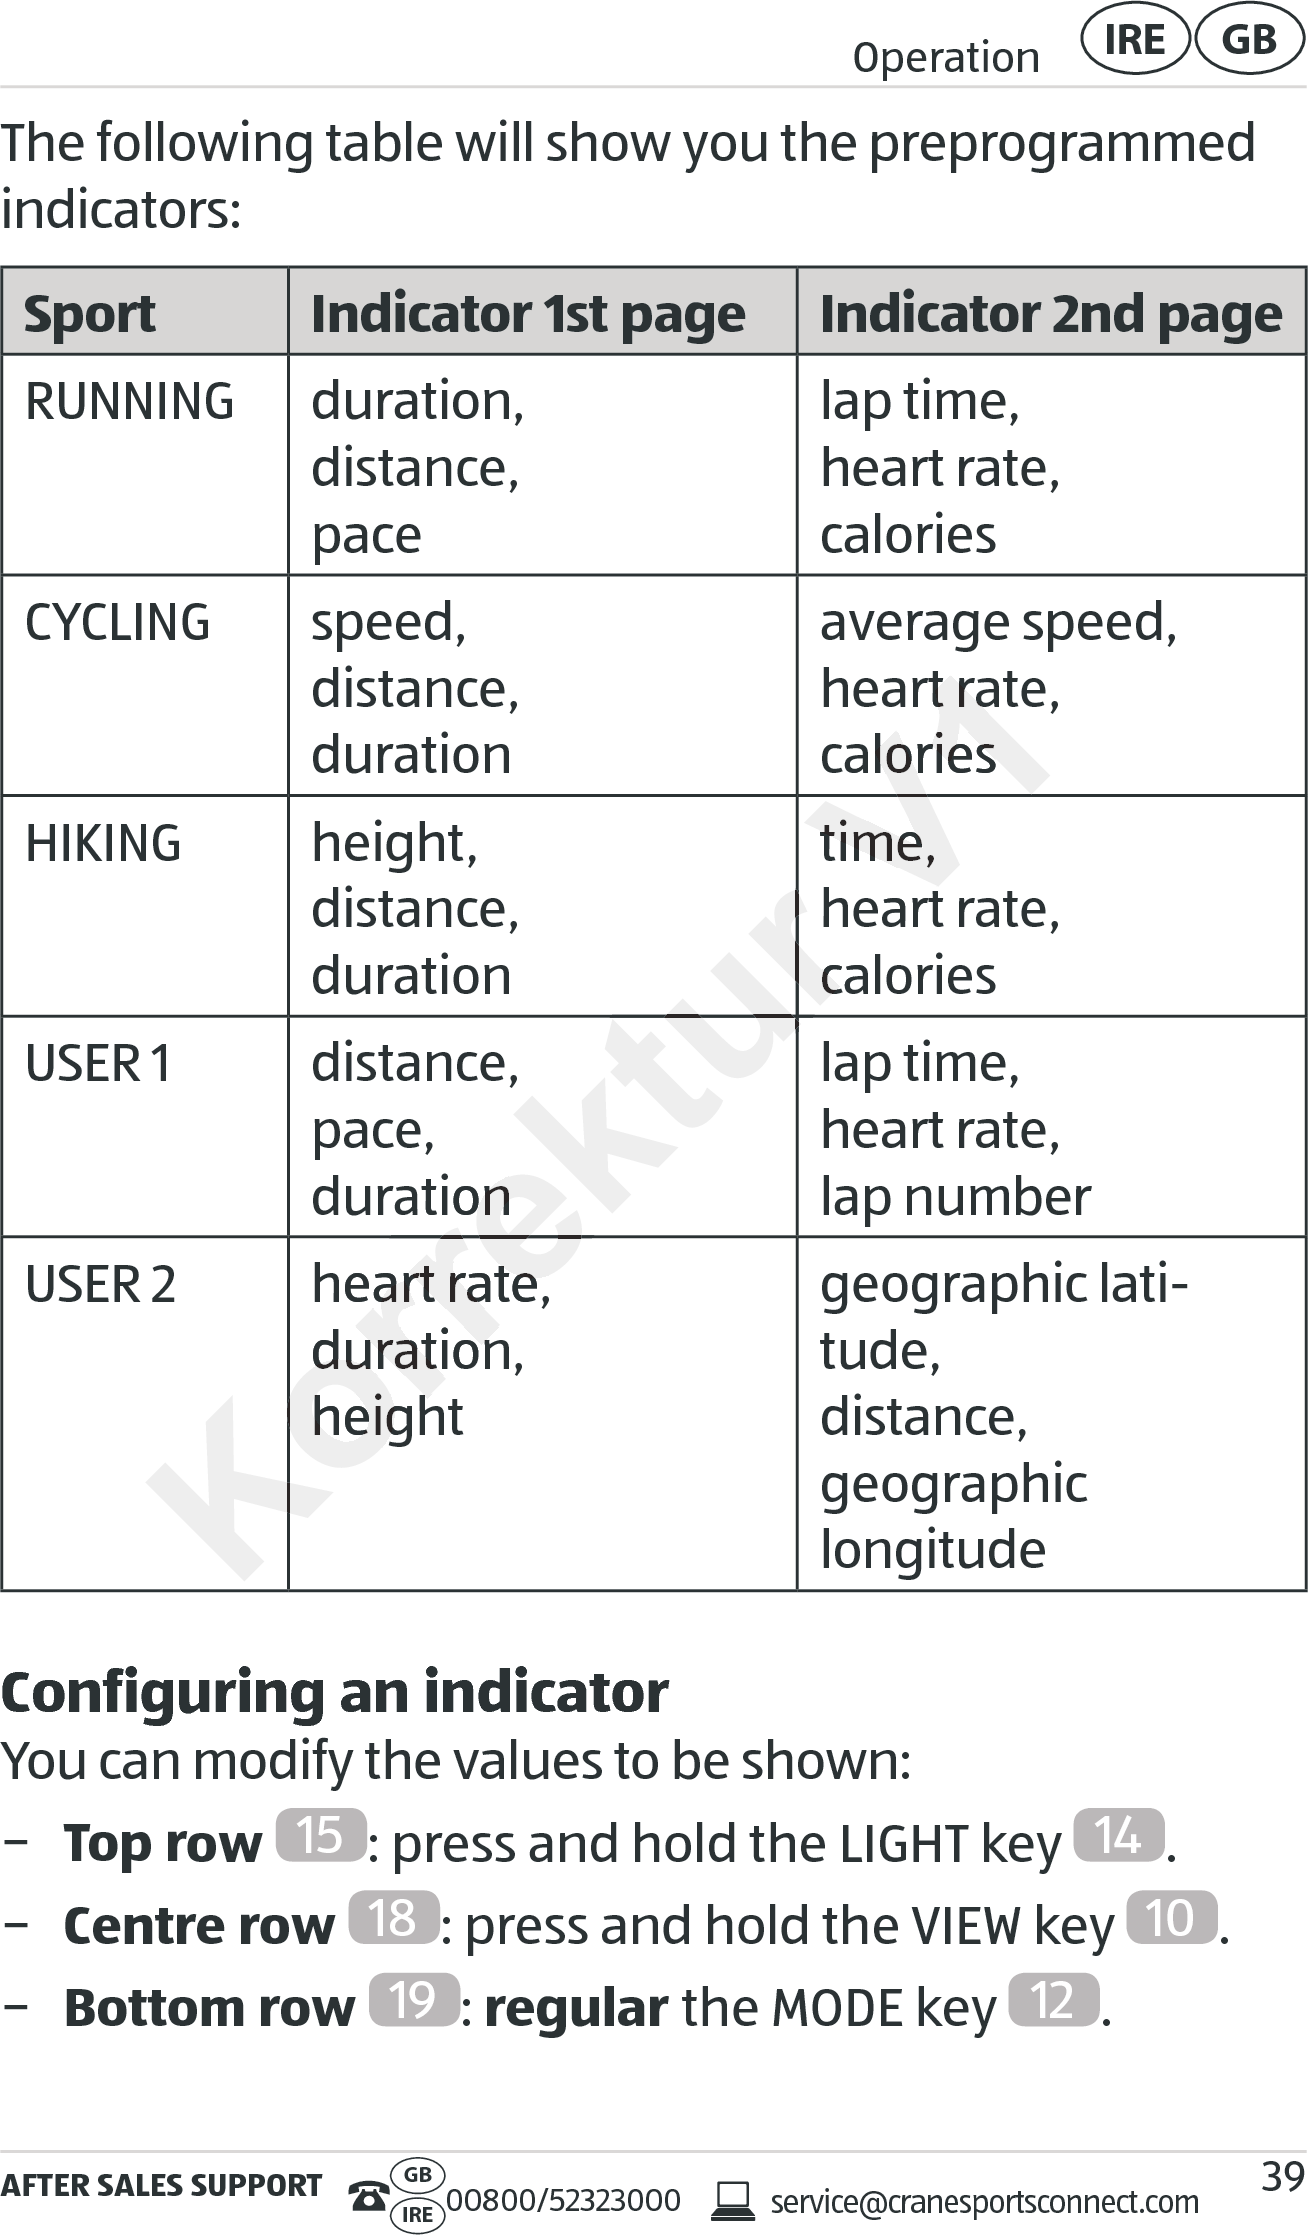 AFTER SALES SUPPORTservice@cranesportsconnect.comGBIRE 00800/52323000Operation GBIRE39The following table will show you the preprogrammed indicators:Sport Indicator 1st page Indicator 2nd pageRUNNING duration, distance, pacelap time, heart rate, caloriesCYCLING speed, distance, durationaverage speed, heart rate, caloriesHIKING height, distance, durationtime, heart rate, caloriesUSER 1 distance, pace, durationlap time,  heart rate, lap numberUSER 2 heart rate, duration, heightgeographic lati-tude, distance, geographic longitudeConfiguring an indicatorYou can modify the values to be shown: − Top row  15 : press and hold the LIGHT key  14 . −Centre row  18 : press and hold the VIEW key  10 . − Bottom row  19 : regular the MODE key  12 .Korrektur Korrektur Korrektur Korrektur Korrektur Korrektur Korrektur heart rate,caloriescaloriesdurationdurationUSER 2 heart rate,USER 2 heart rate,duration,duration,heightheightV1V1heart rate,heart rate,caloriescaloriestime,time,heart rate,heart rate,